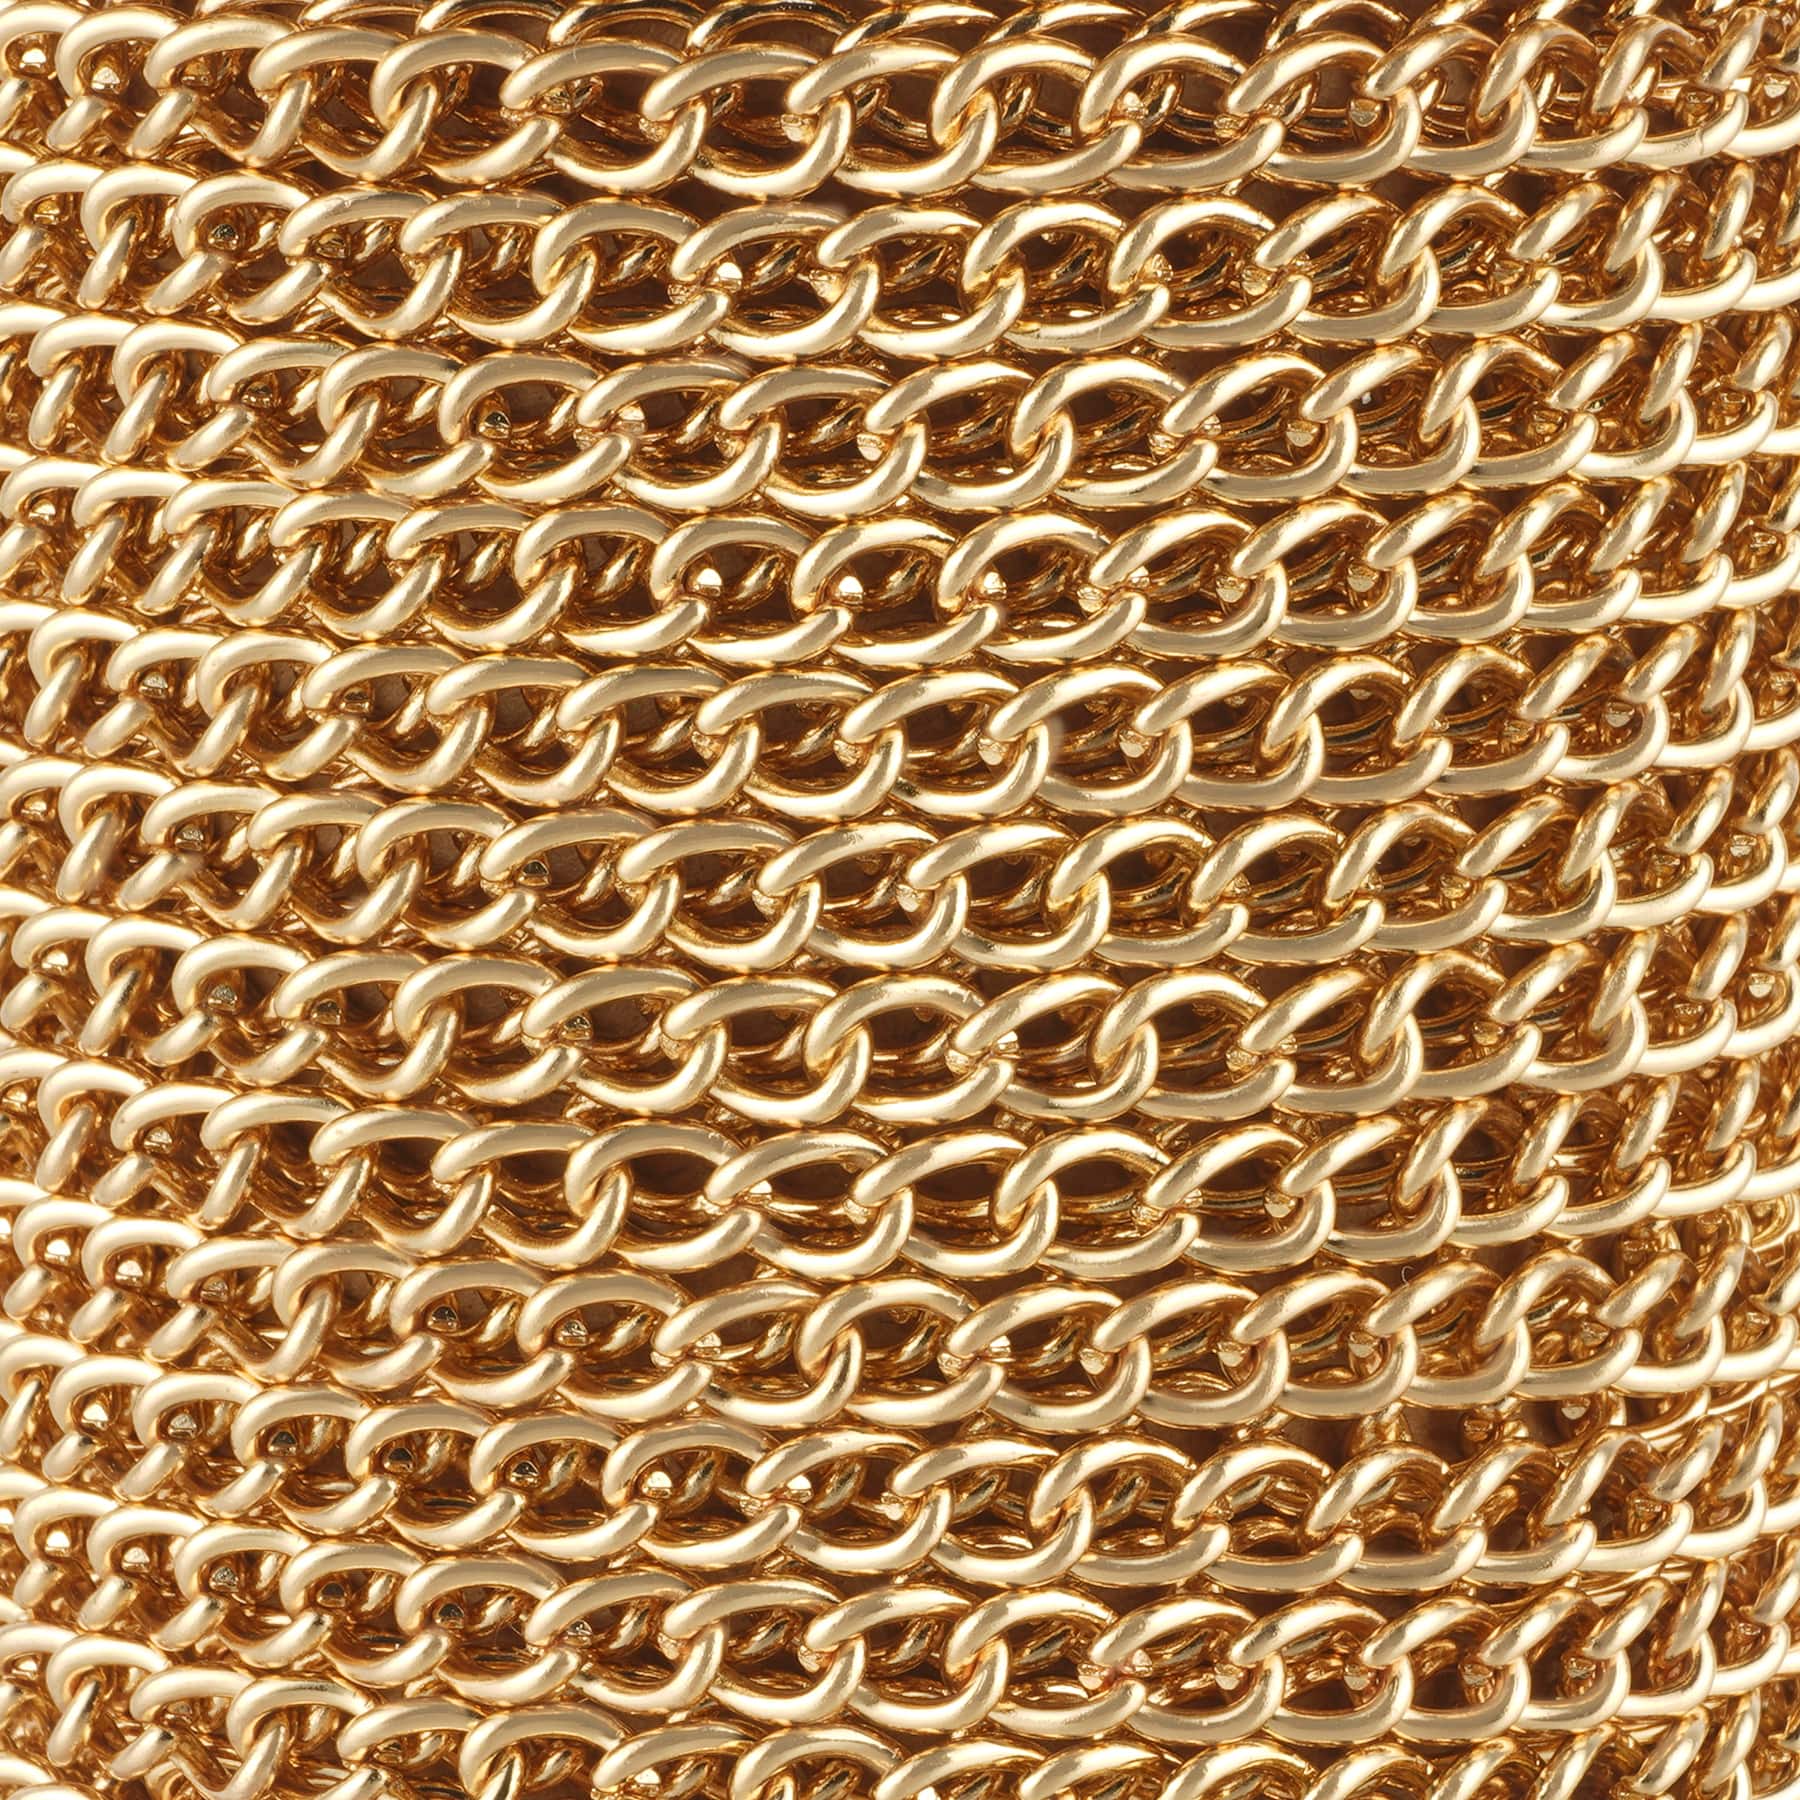 6 Pack: 6yd. Gold Curb Chain by Bead Landing&#x2122;